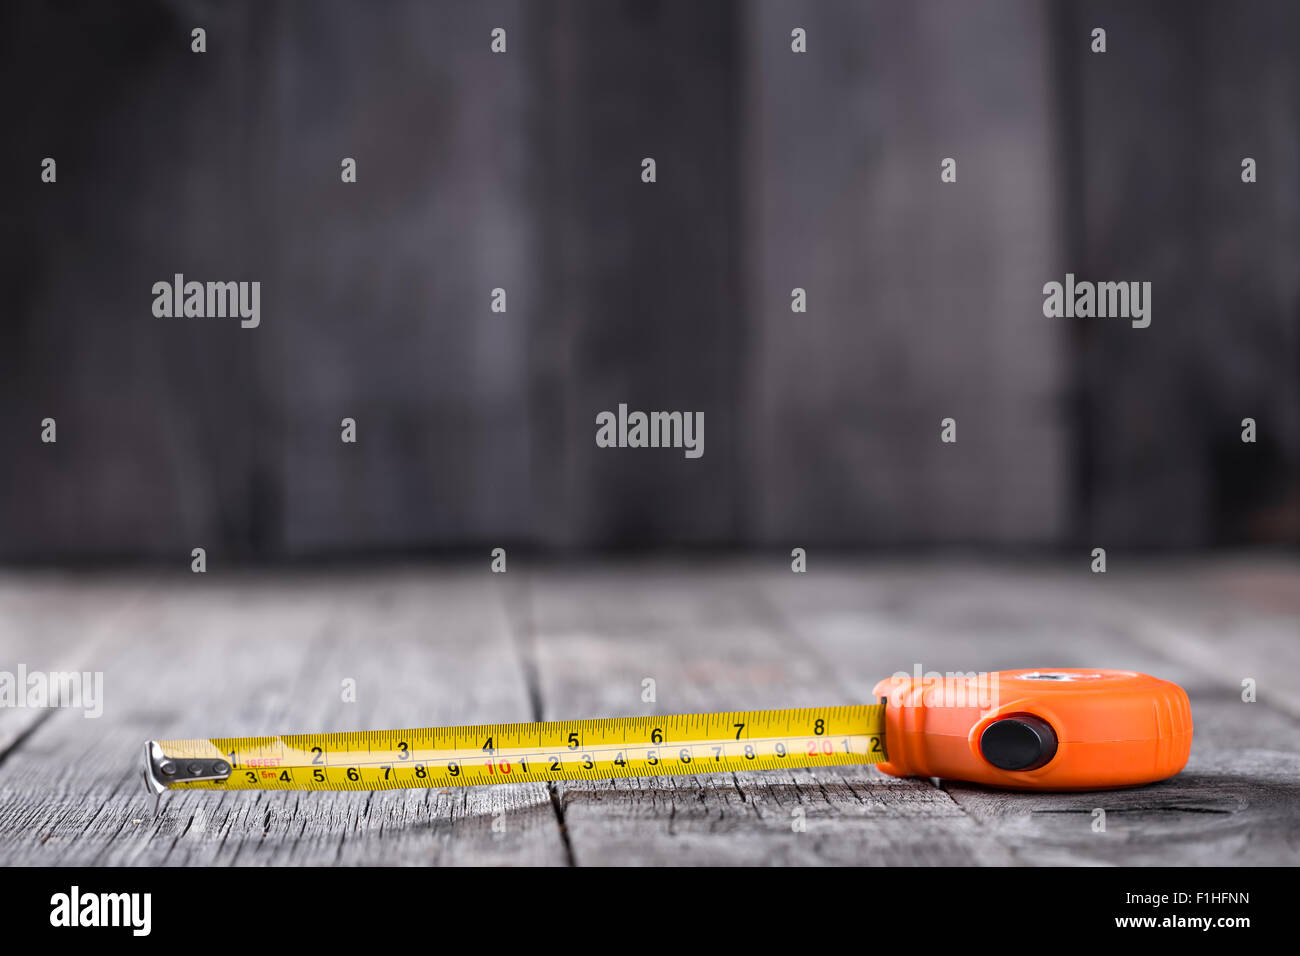 Measuring tape on a wooden board with copyspace Stock Photo